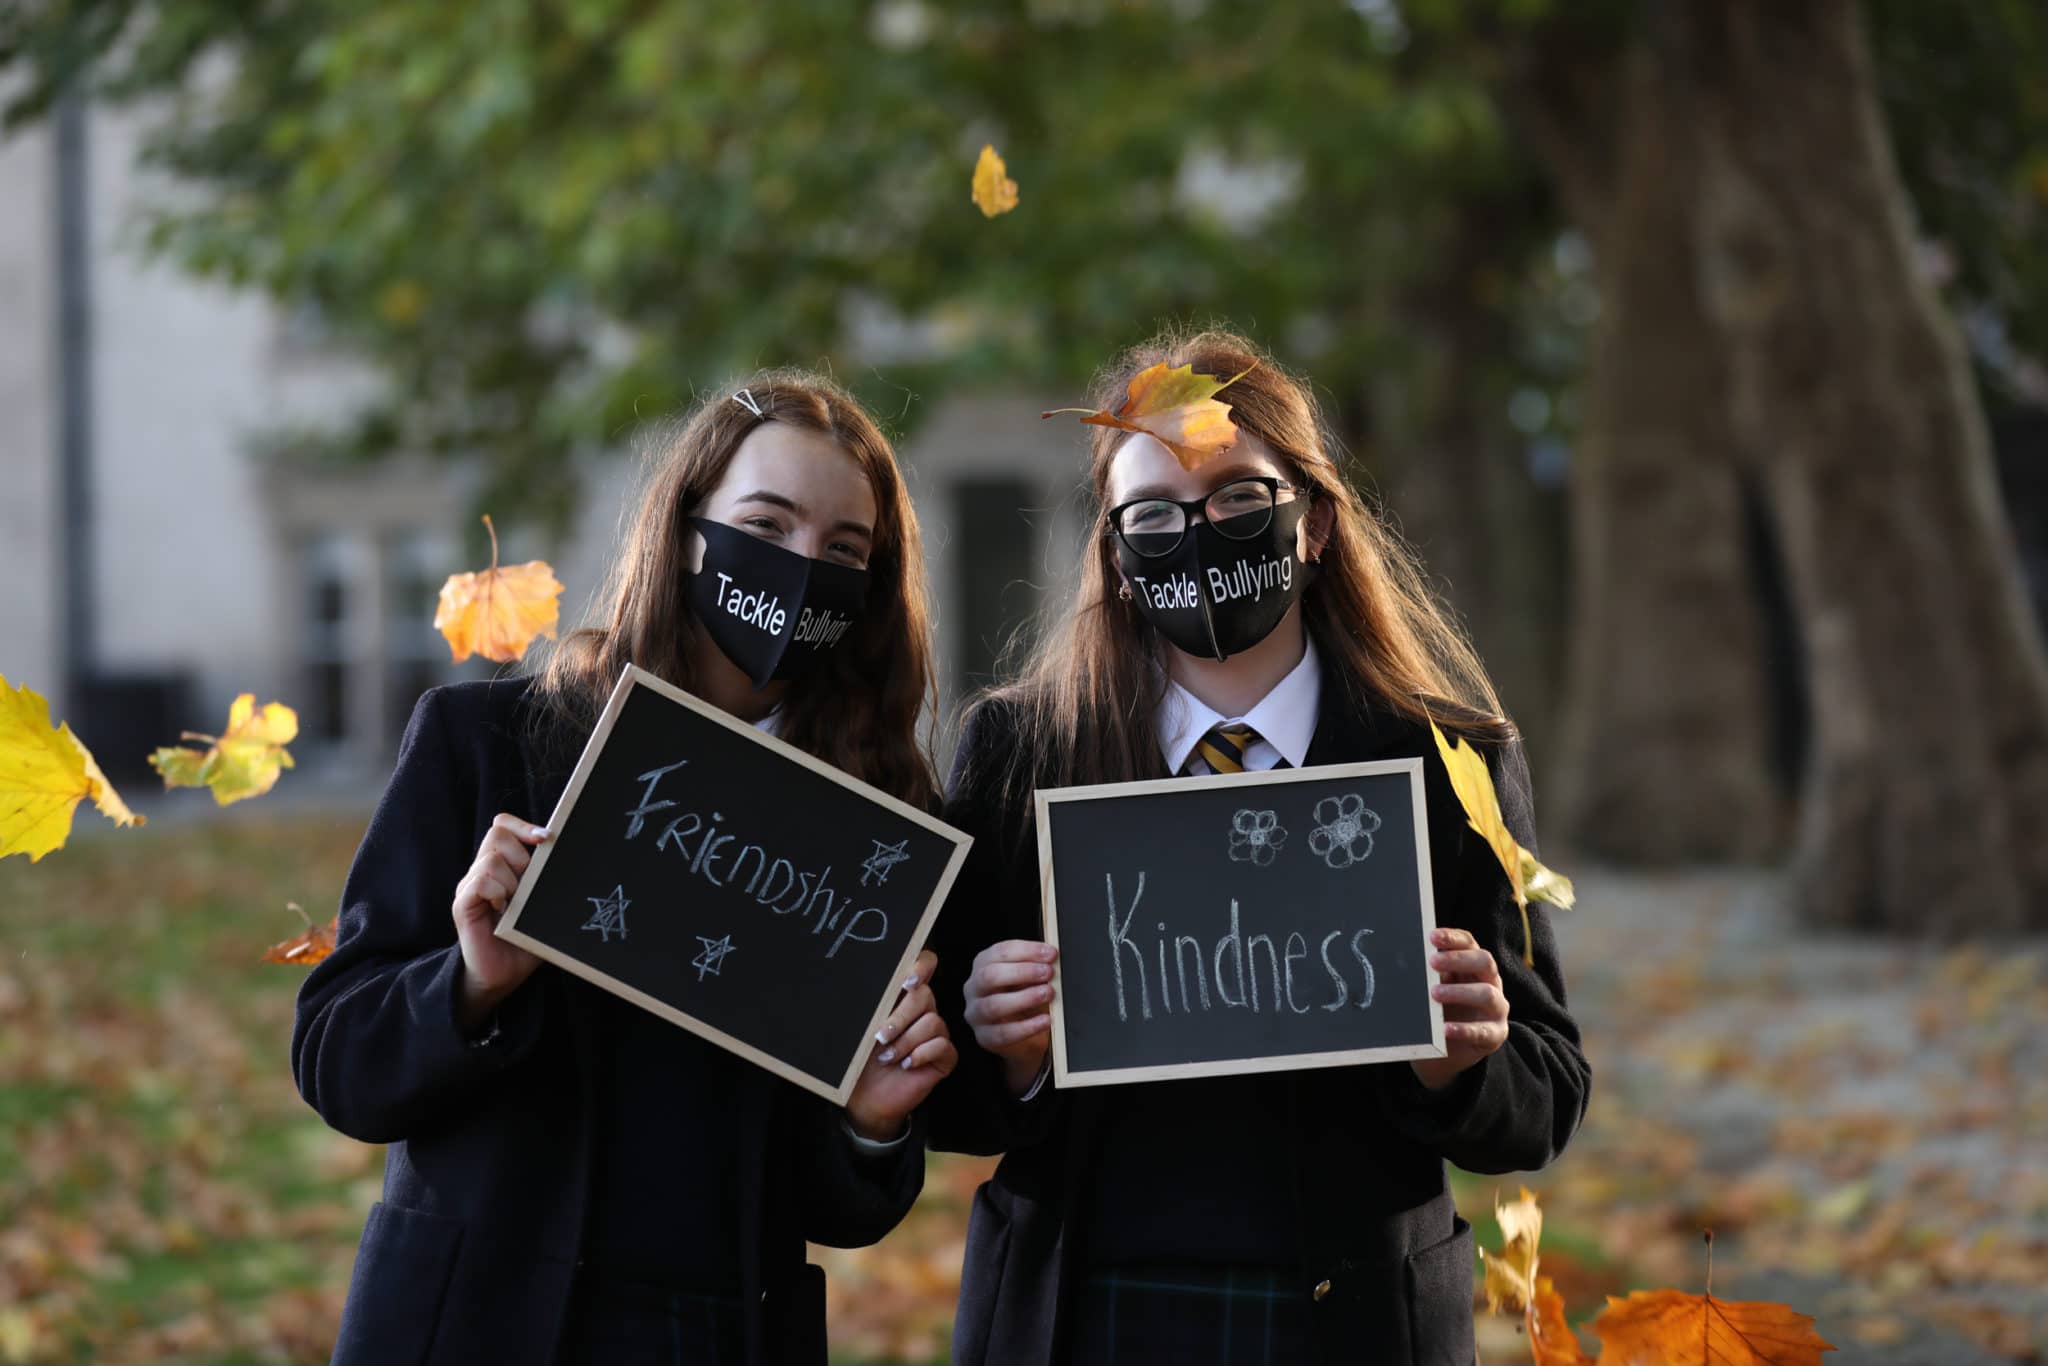 This is a photo of two students smiling and holding signs that say "Friendship" and "Kindness". They are both wearing masks that say "Tackle Bullying" on them.